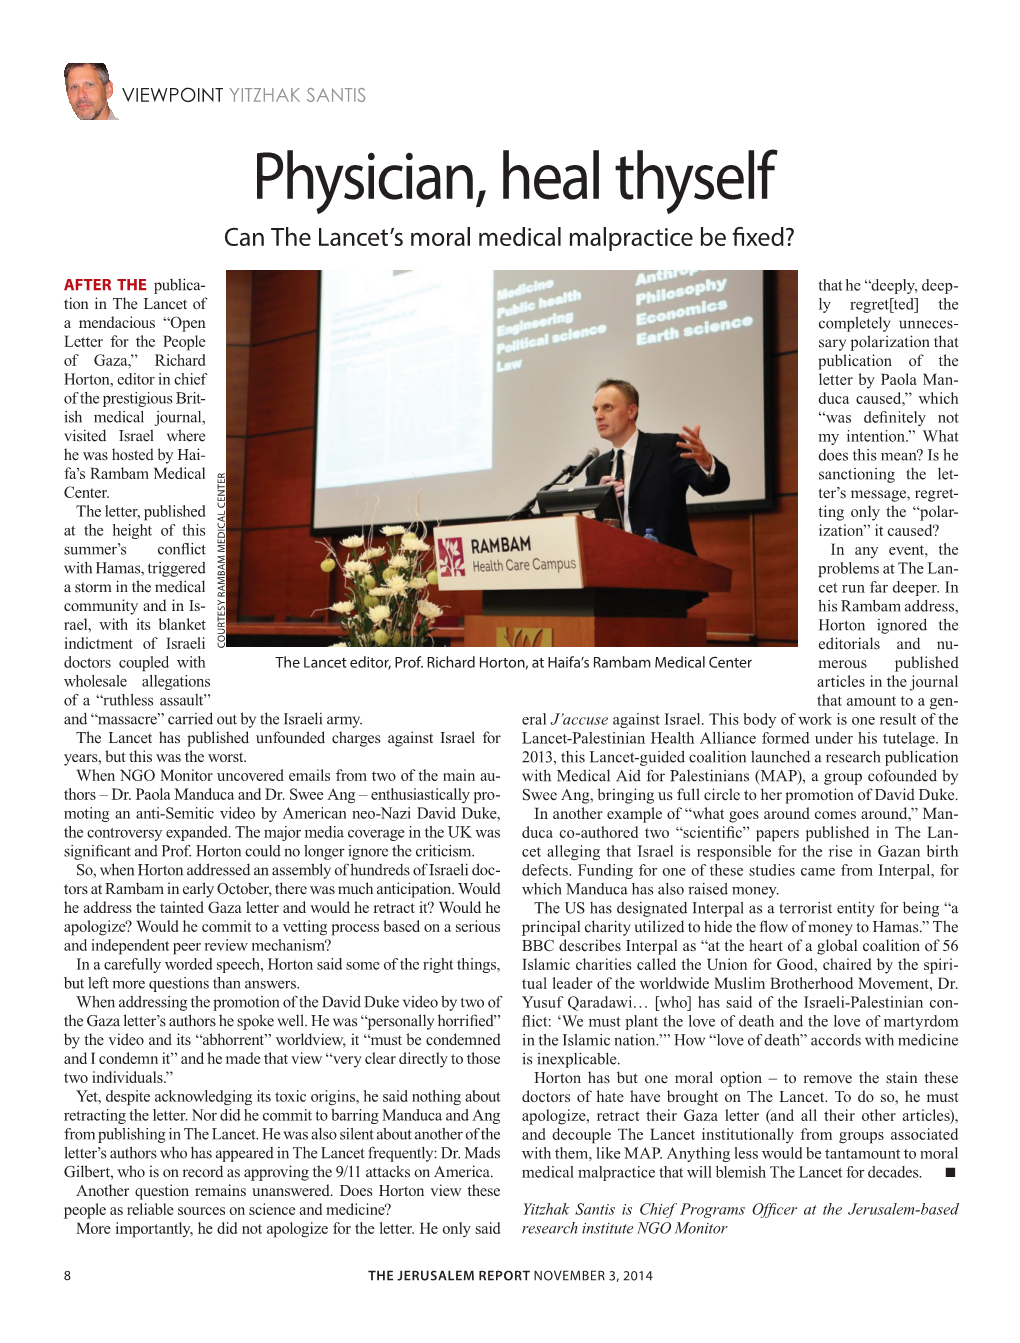 Physician, Heal Thyself Can the Lancet’S Moral Medical Malpractice Be Fixed?